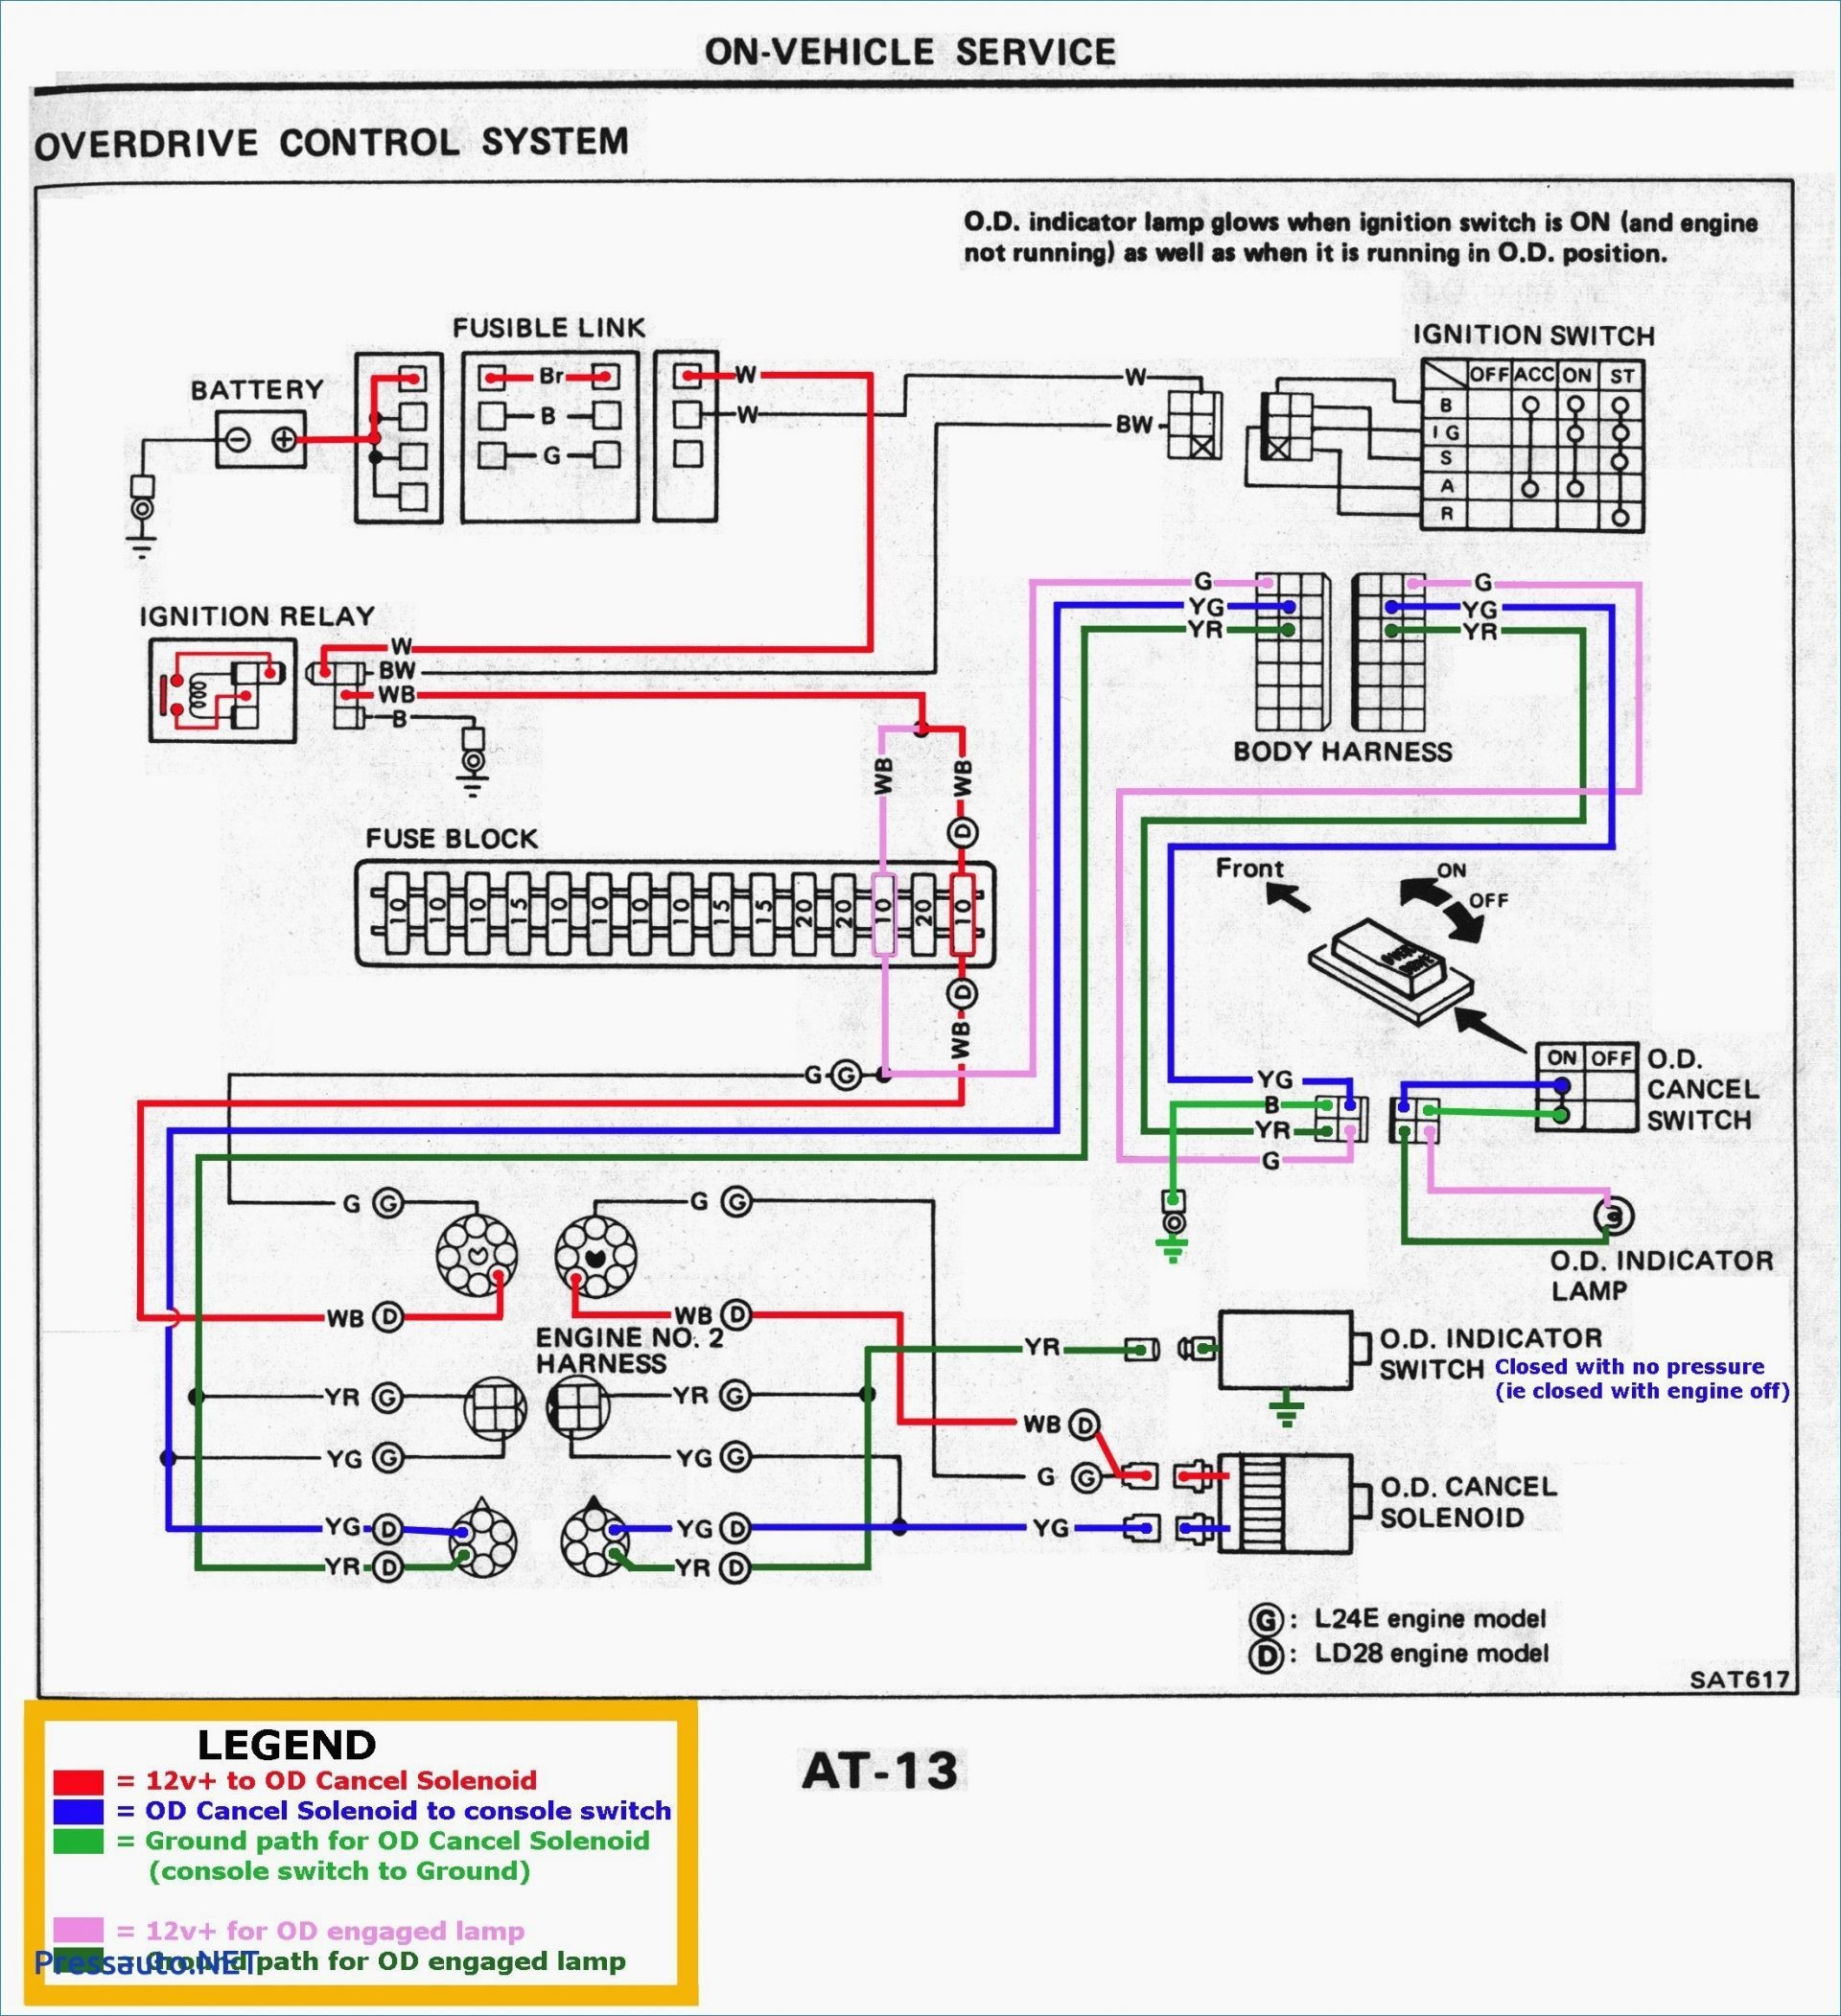 2002 ford Escape Engine Diagram 2002 Prius Engine Diagram Another Blog About Wiring Diagram • Of 2002 ford Escape Engine Diagram